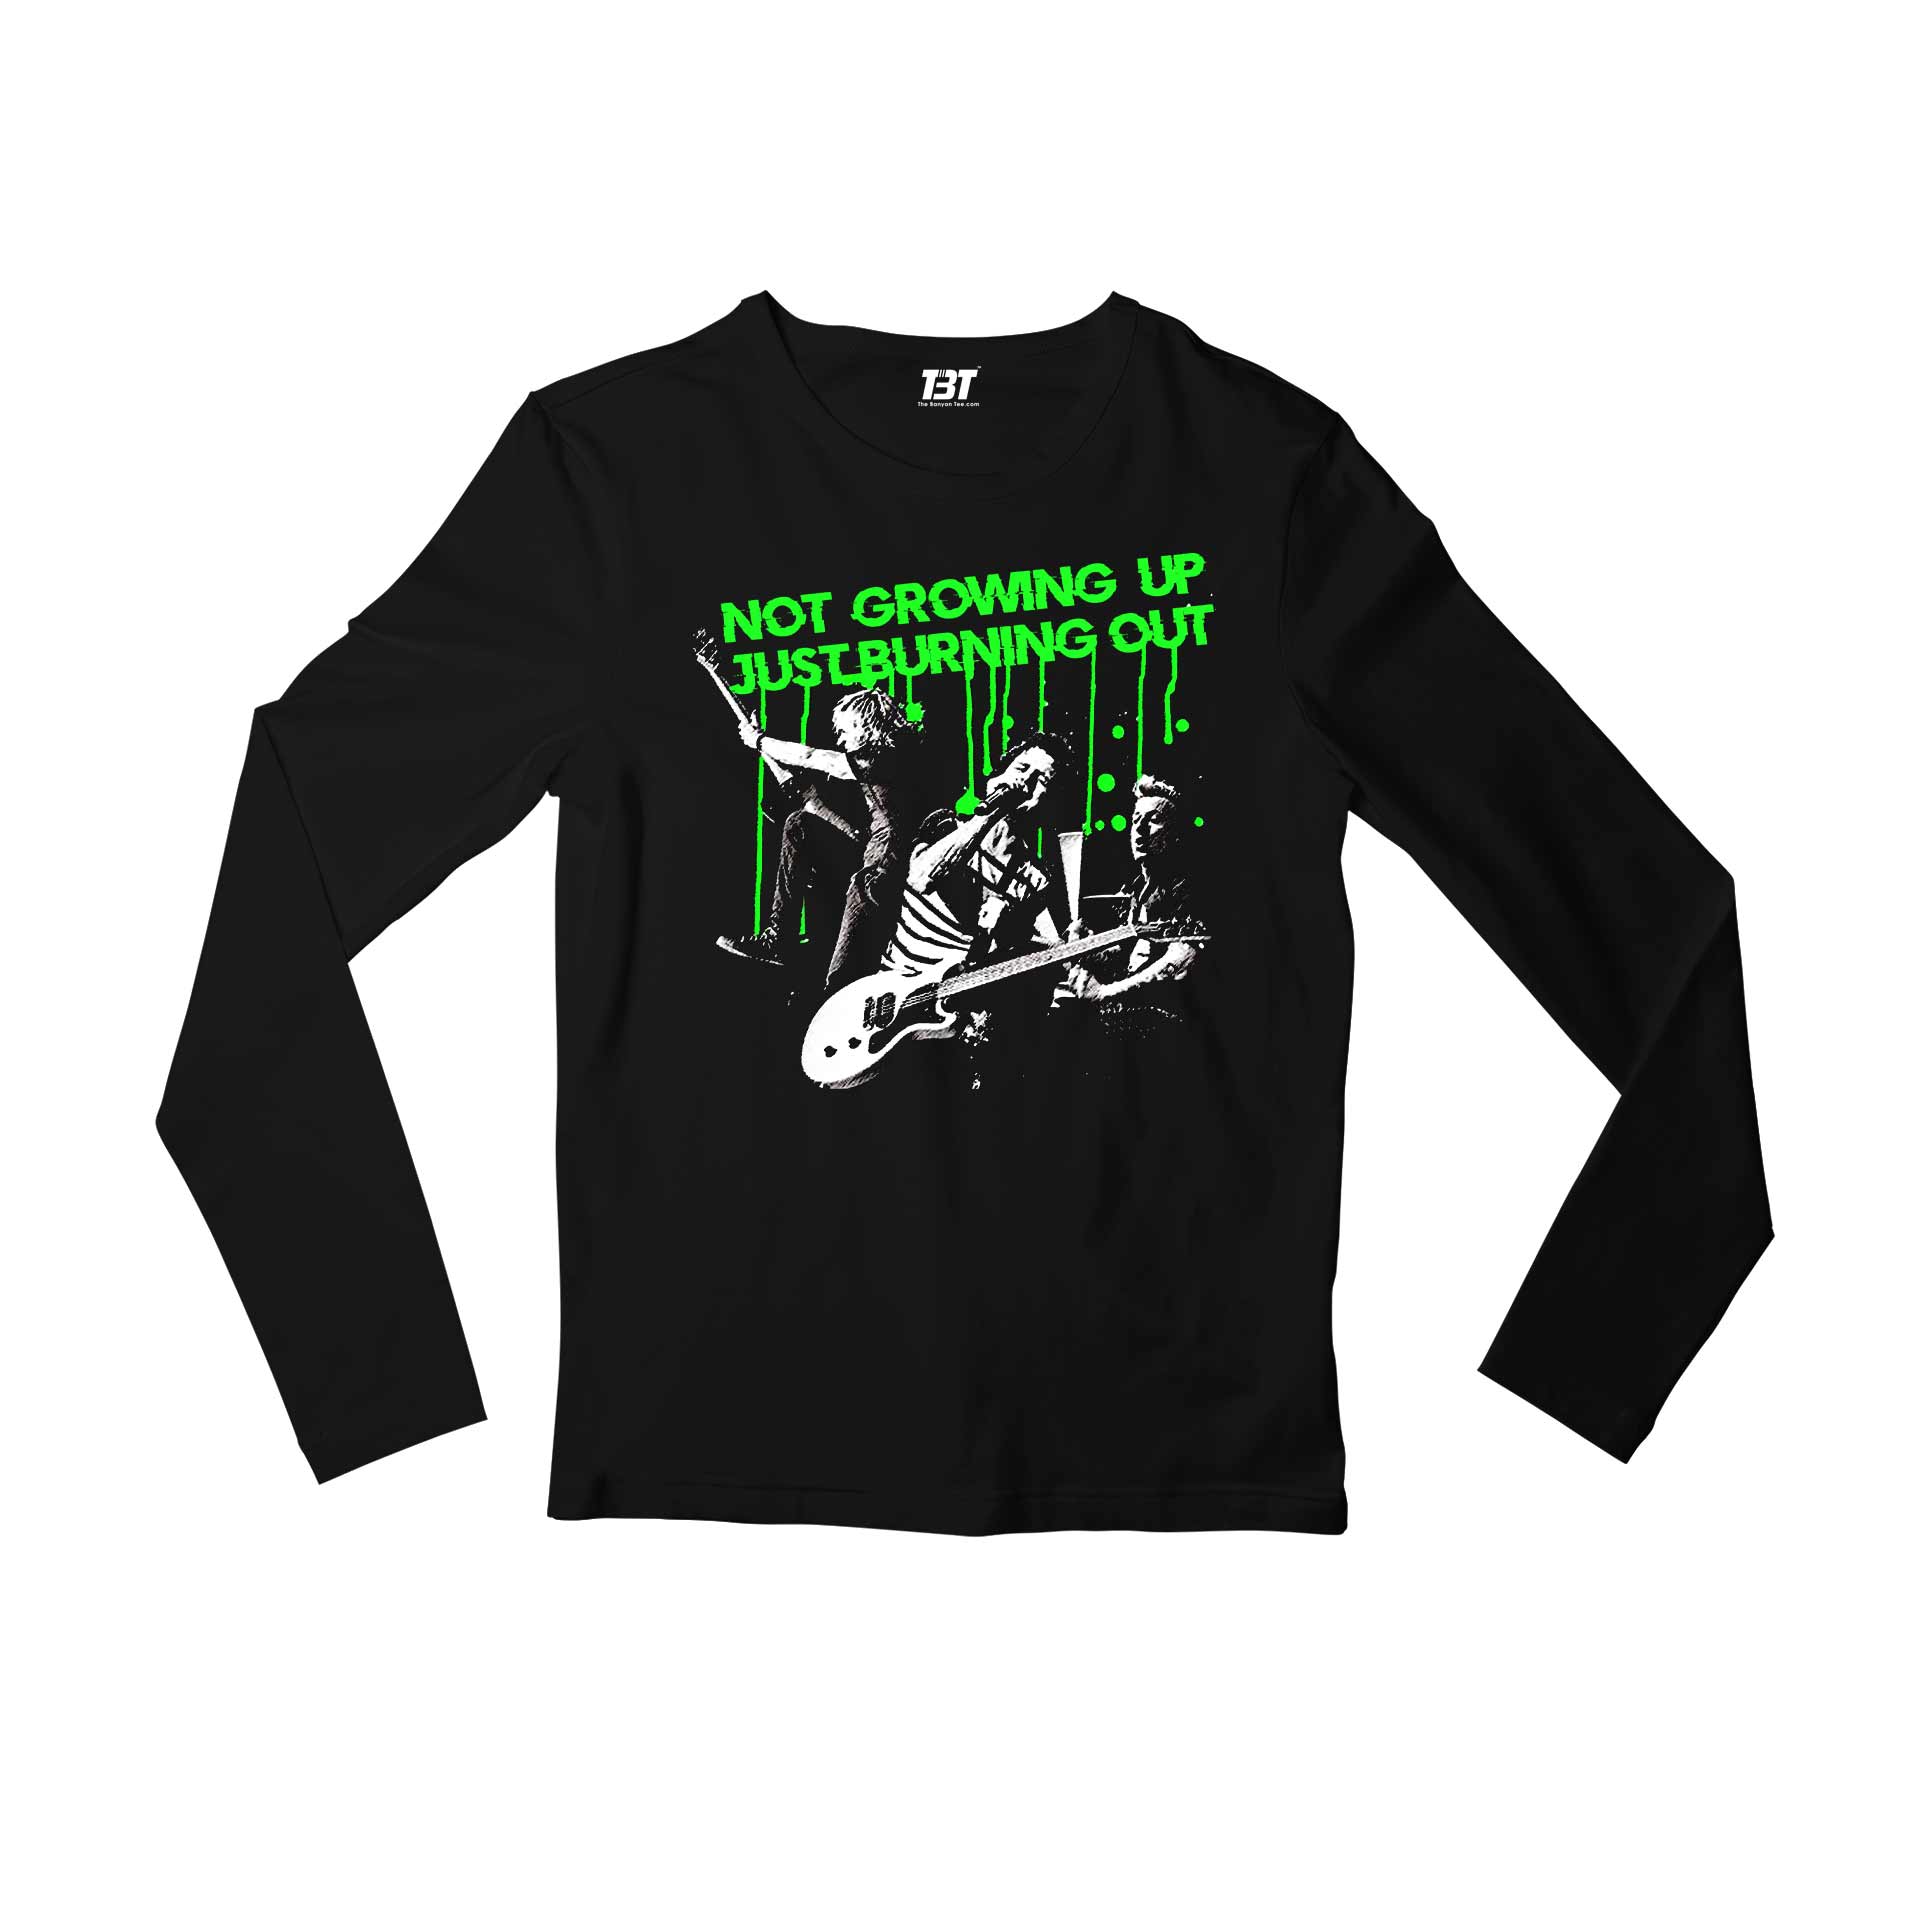 green day burnout full sleeves long sleeves music band buy online india the banyan tee tbt men women girls boys unisex black not growing up just burning out